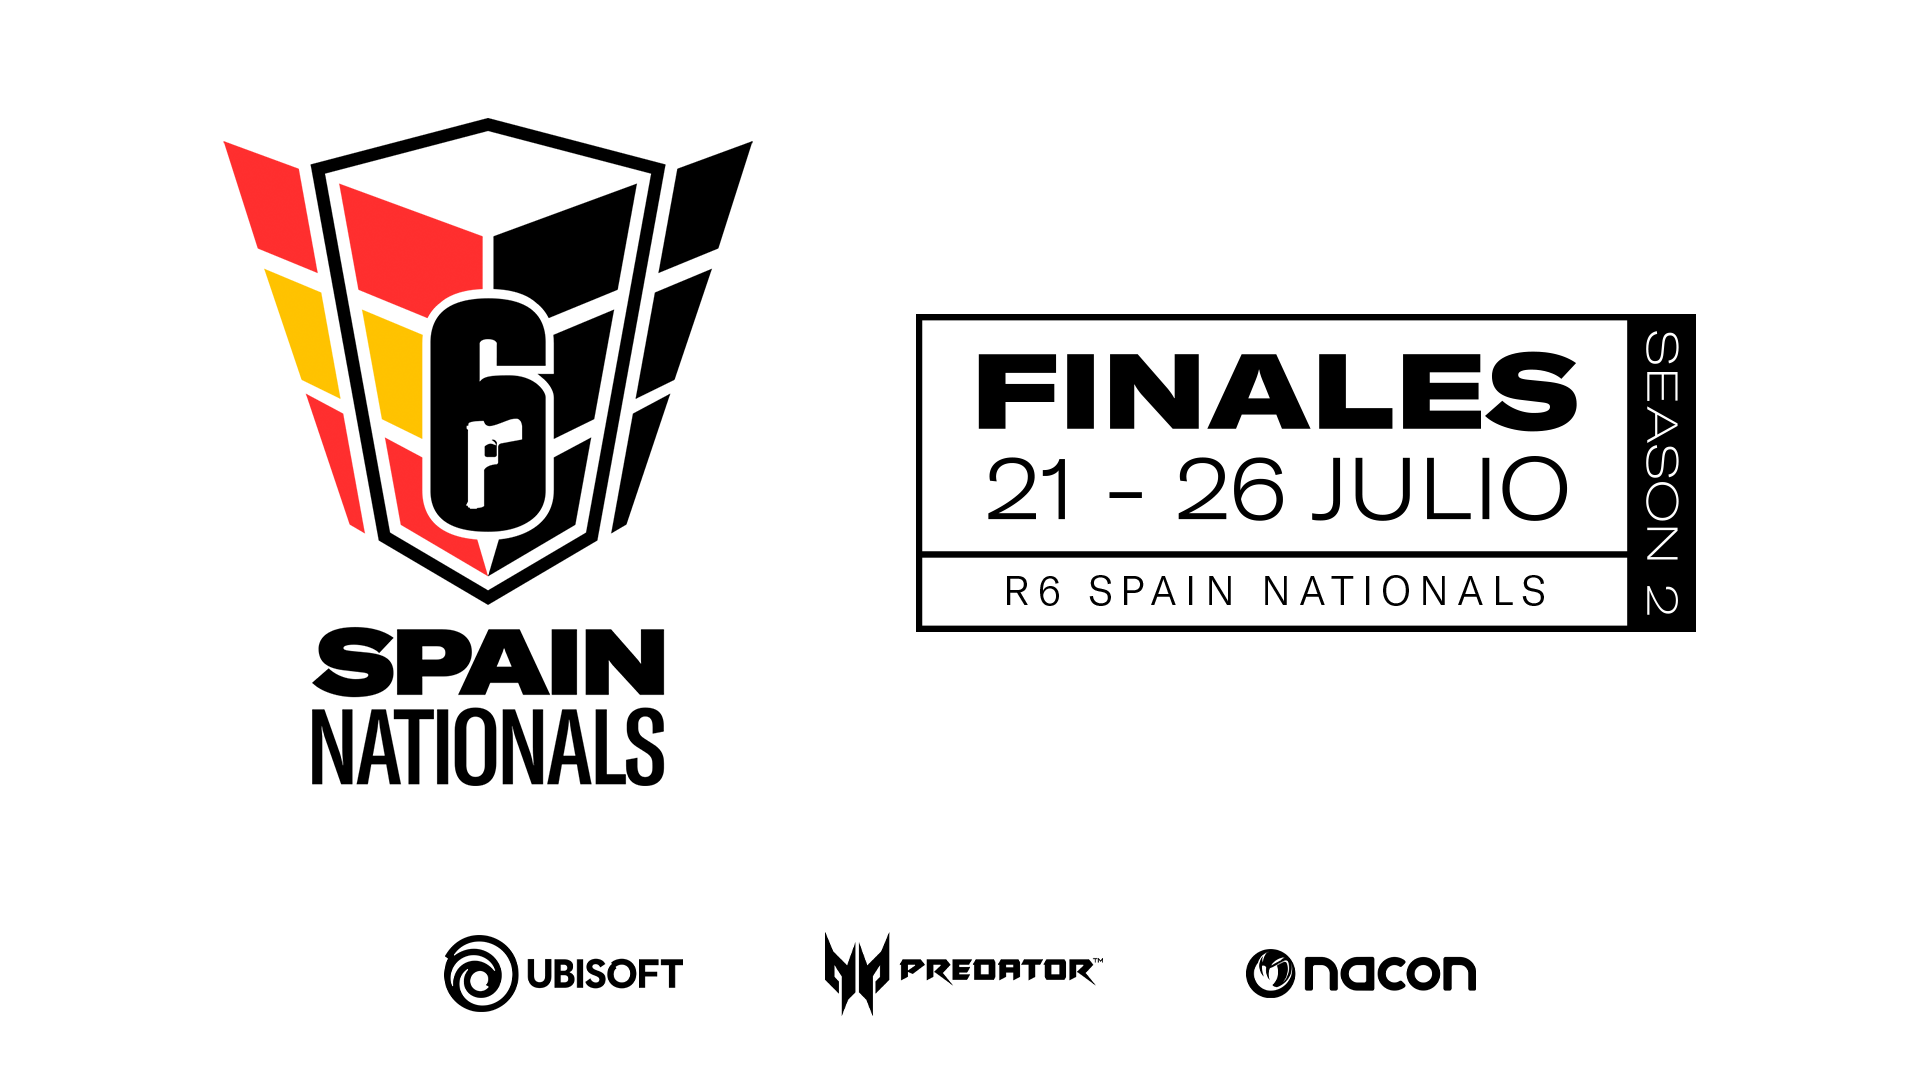 R6 Spain Nationals